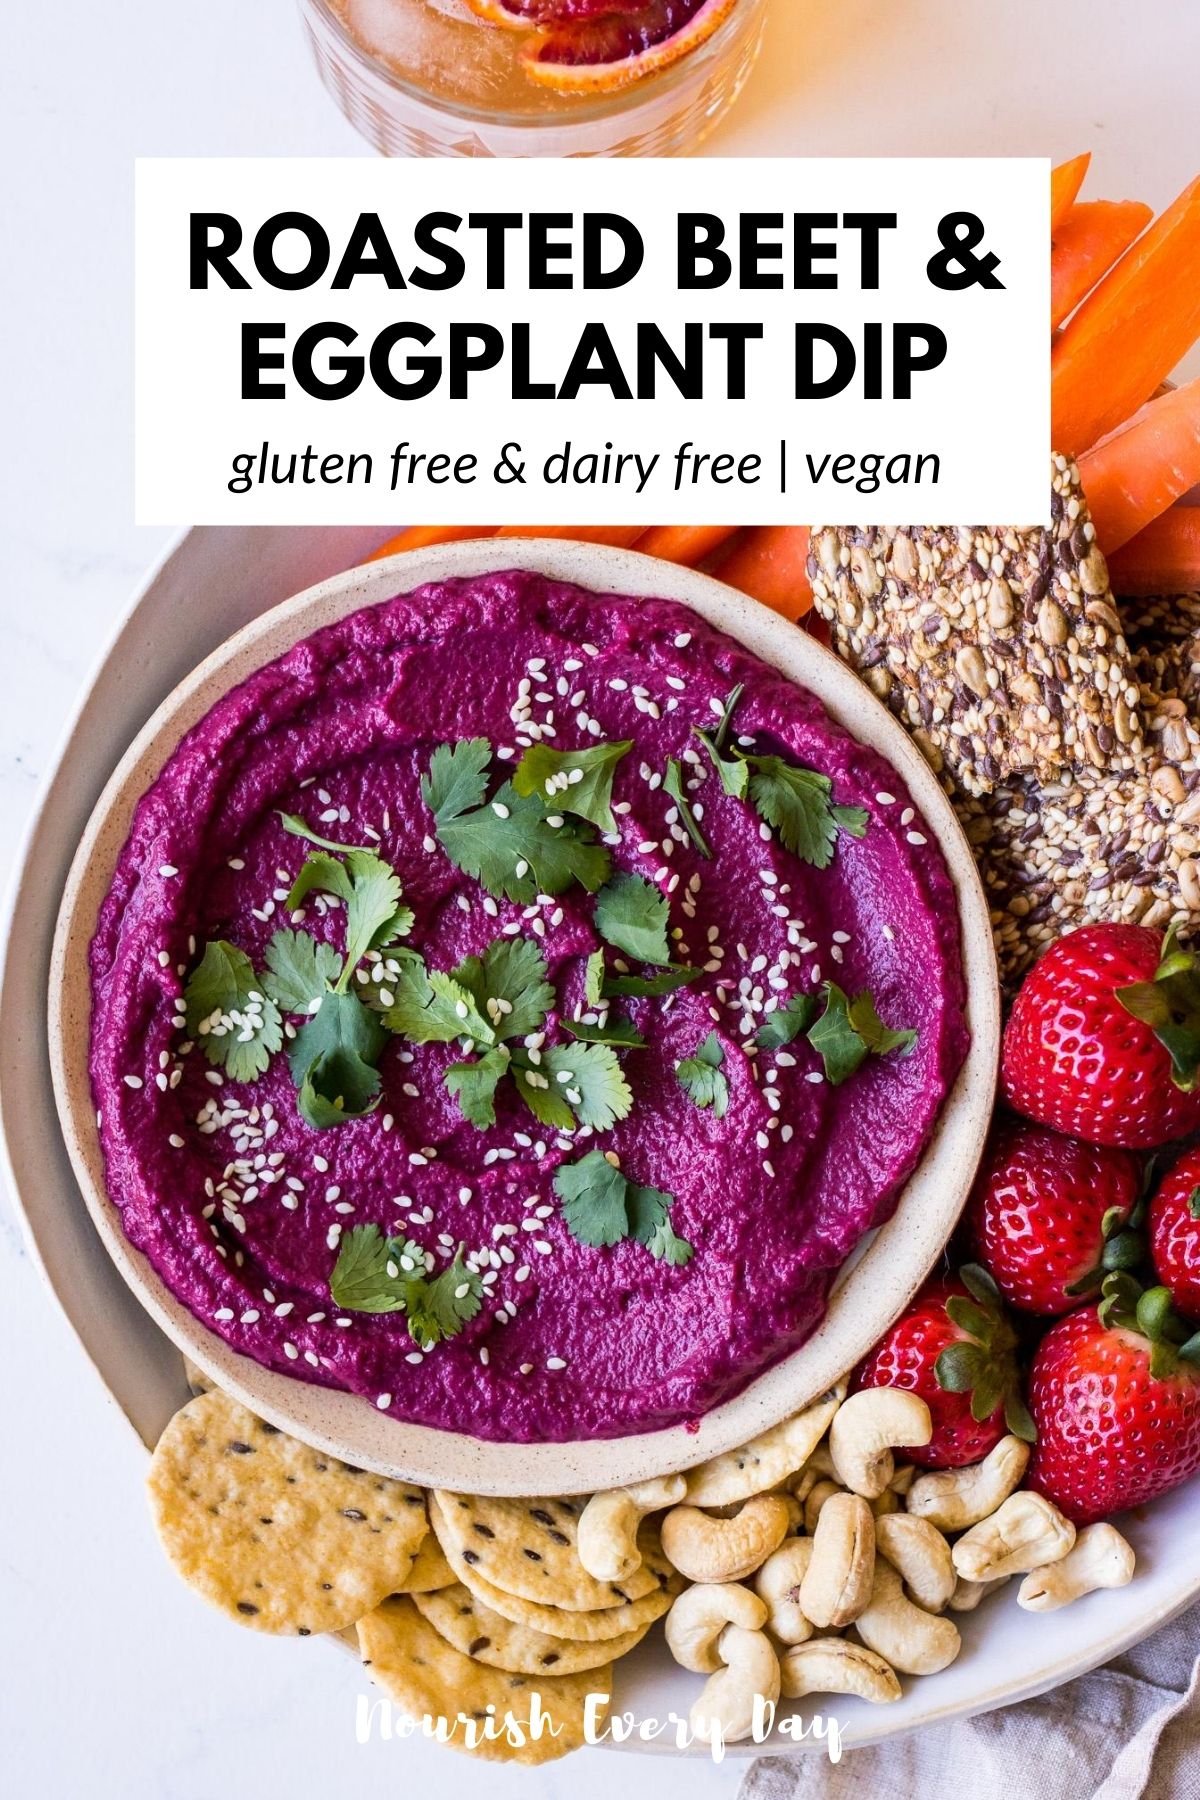 Recipe Pin for Roasted Beet and Eggplant Dip by Nourish Every Day